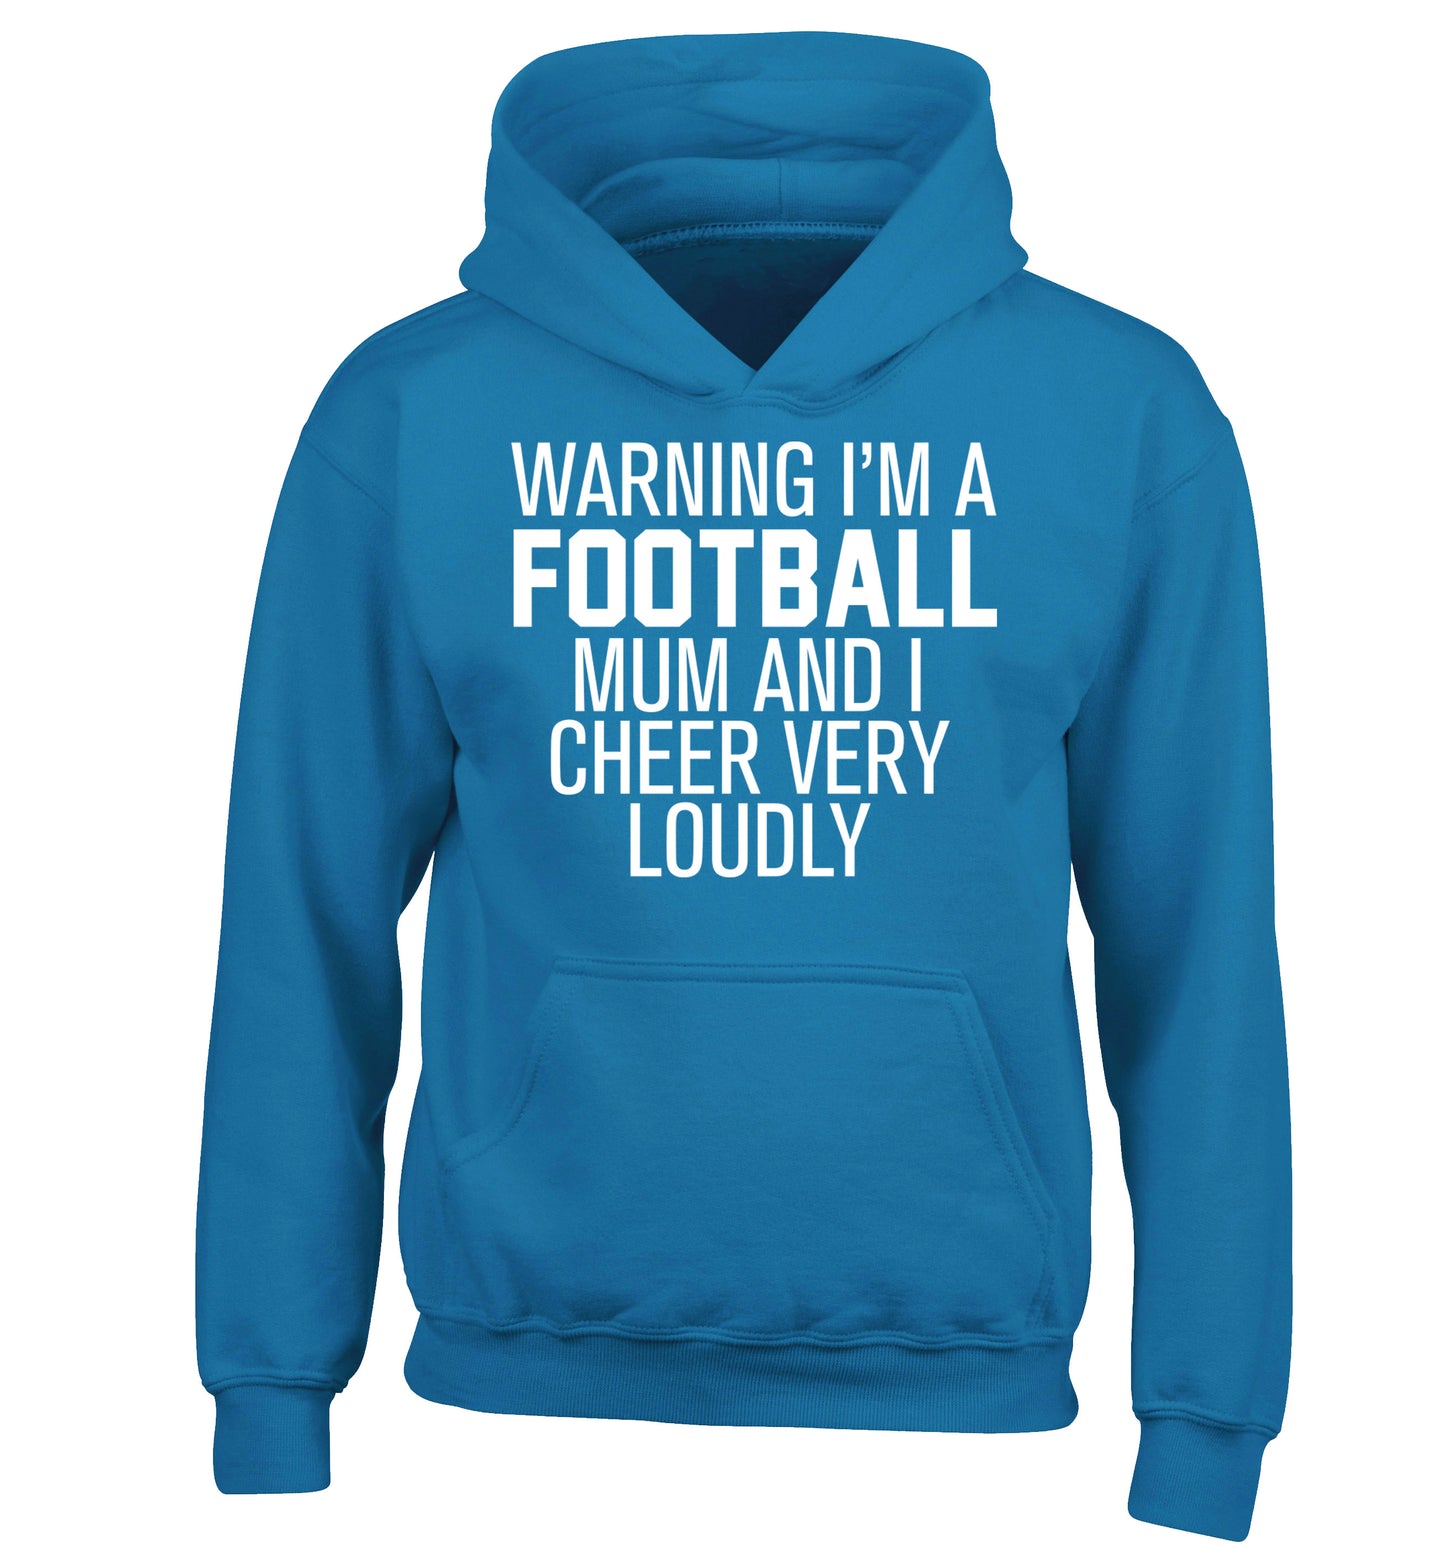 Warning I'm a football mum and I cheer very loudly children's blue hoodie 12-14 Years